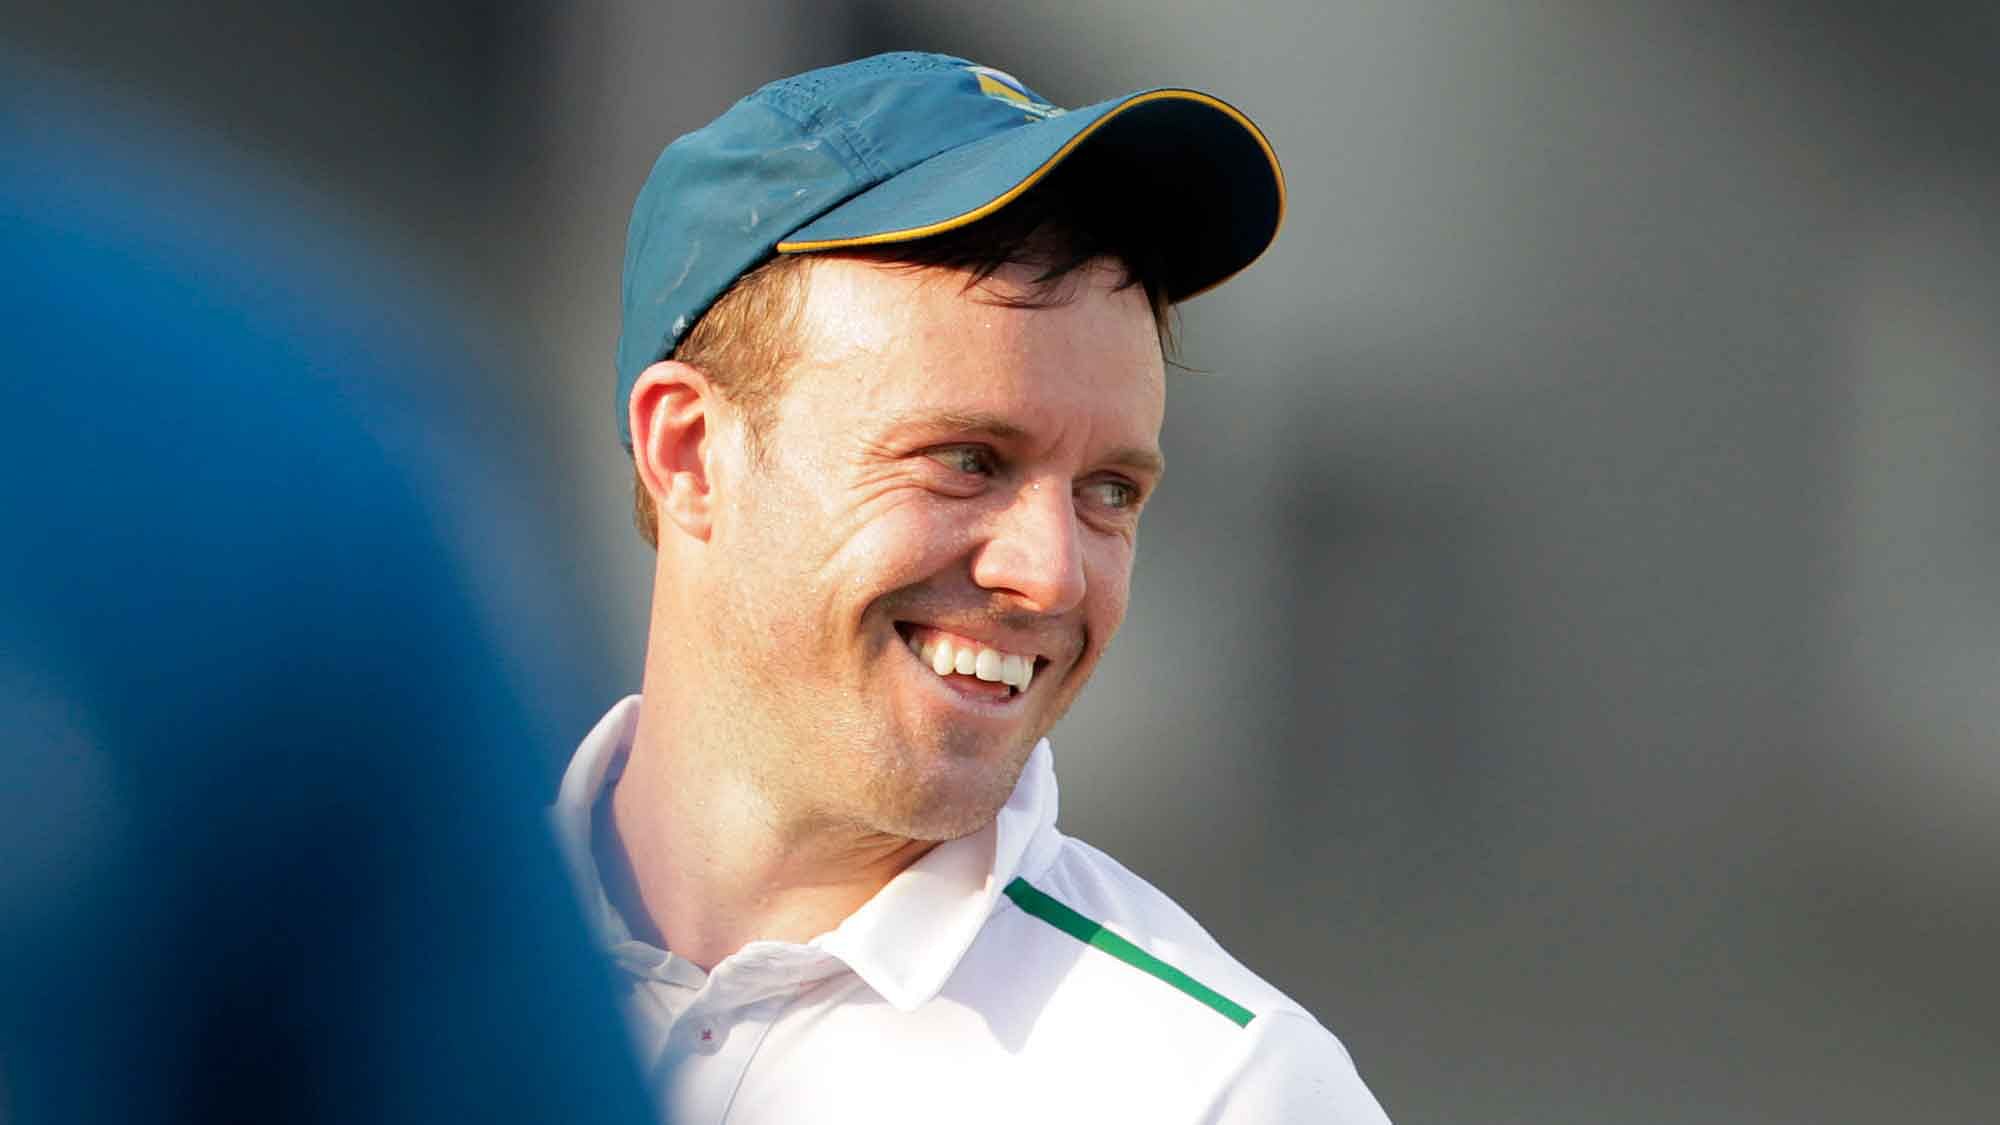 AB de Villiers has declared himself fit for the challenge of day-night Test ahead of the one-off match against Zimbabwe.